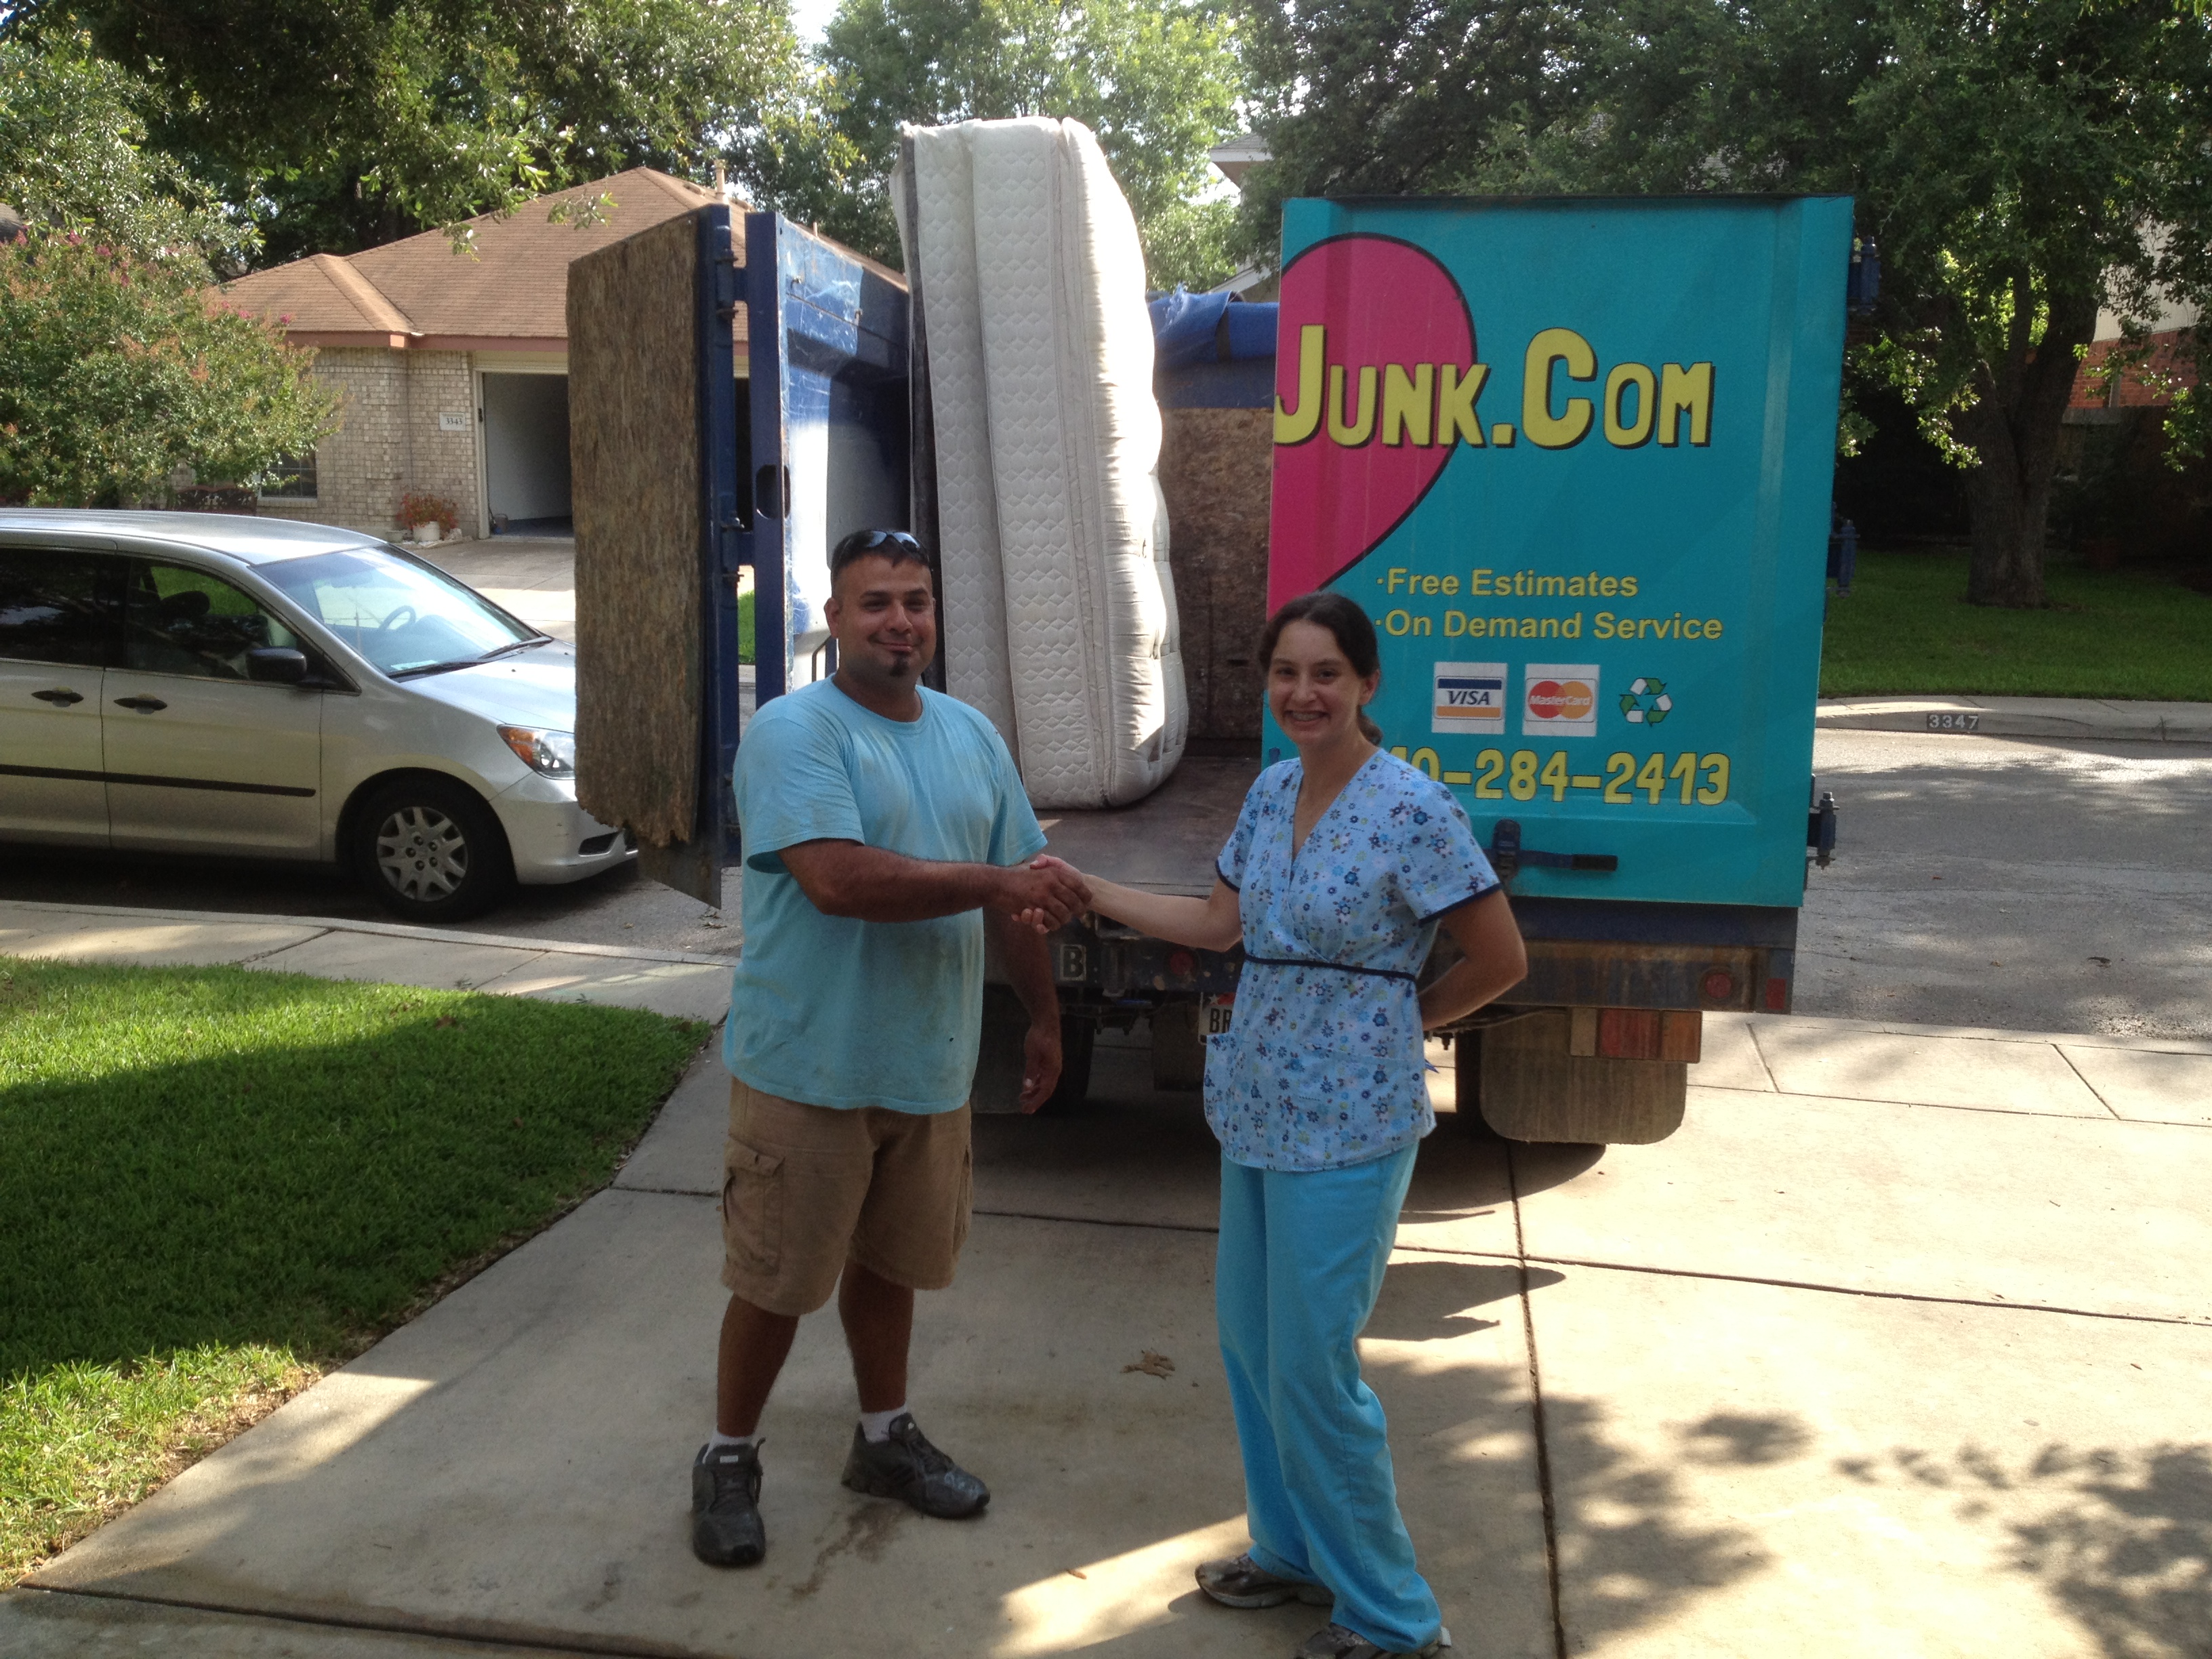 Searching for the best and most convenient junk hauling near you? We Heart Junk is a junk removal service that will efficiently and inexpensively take junk from your home, business or construction site.